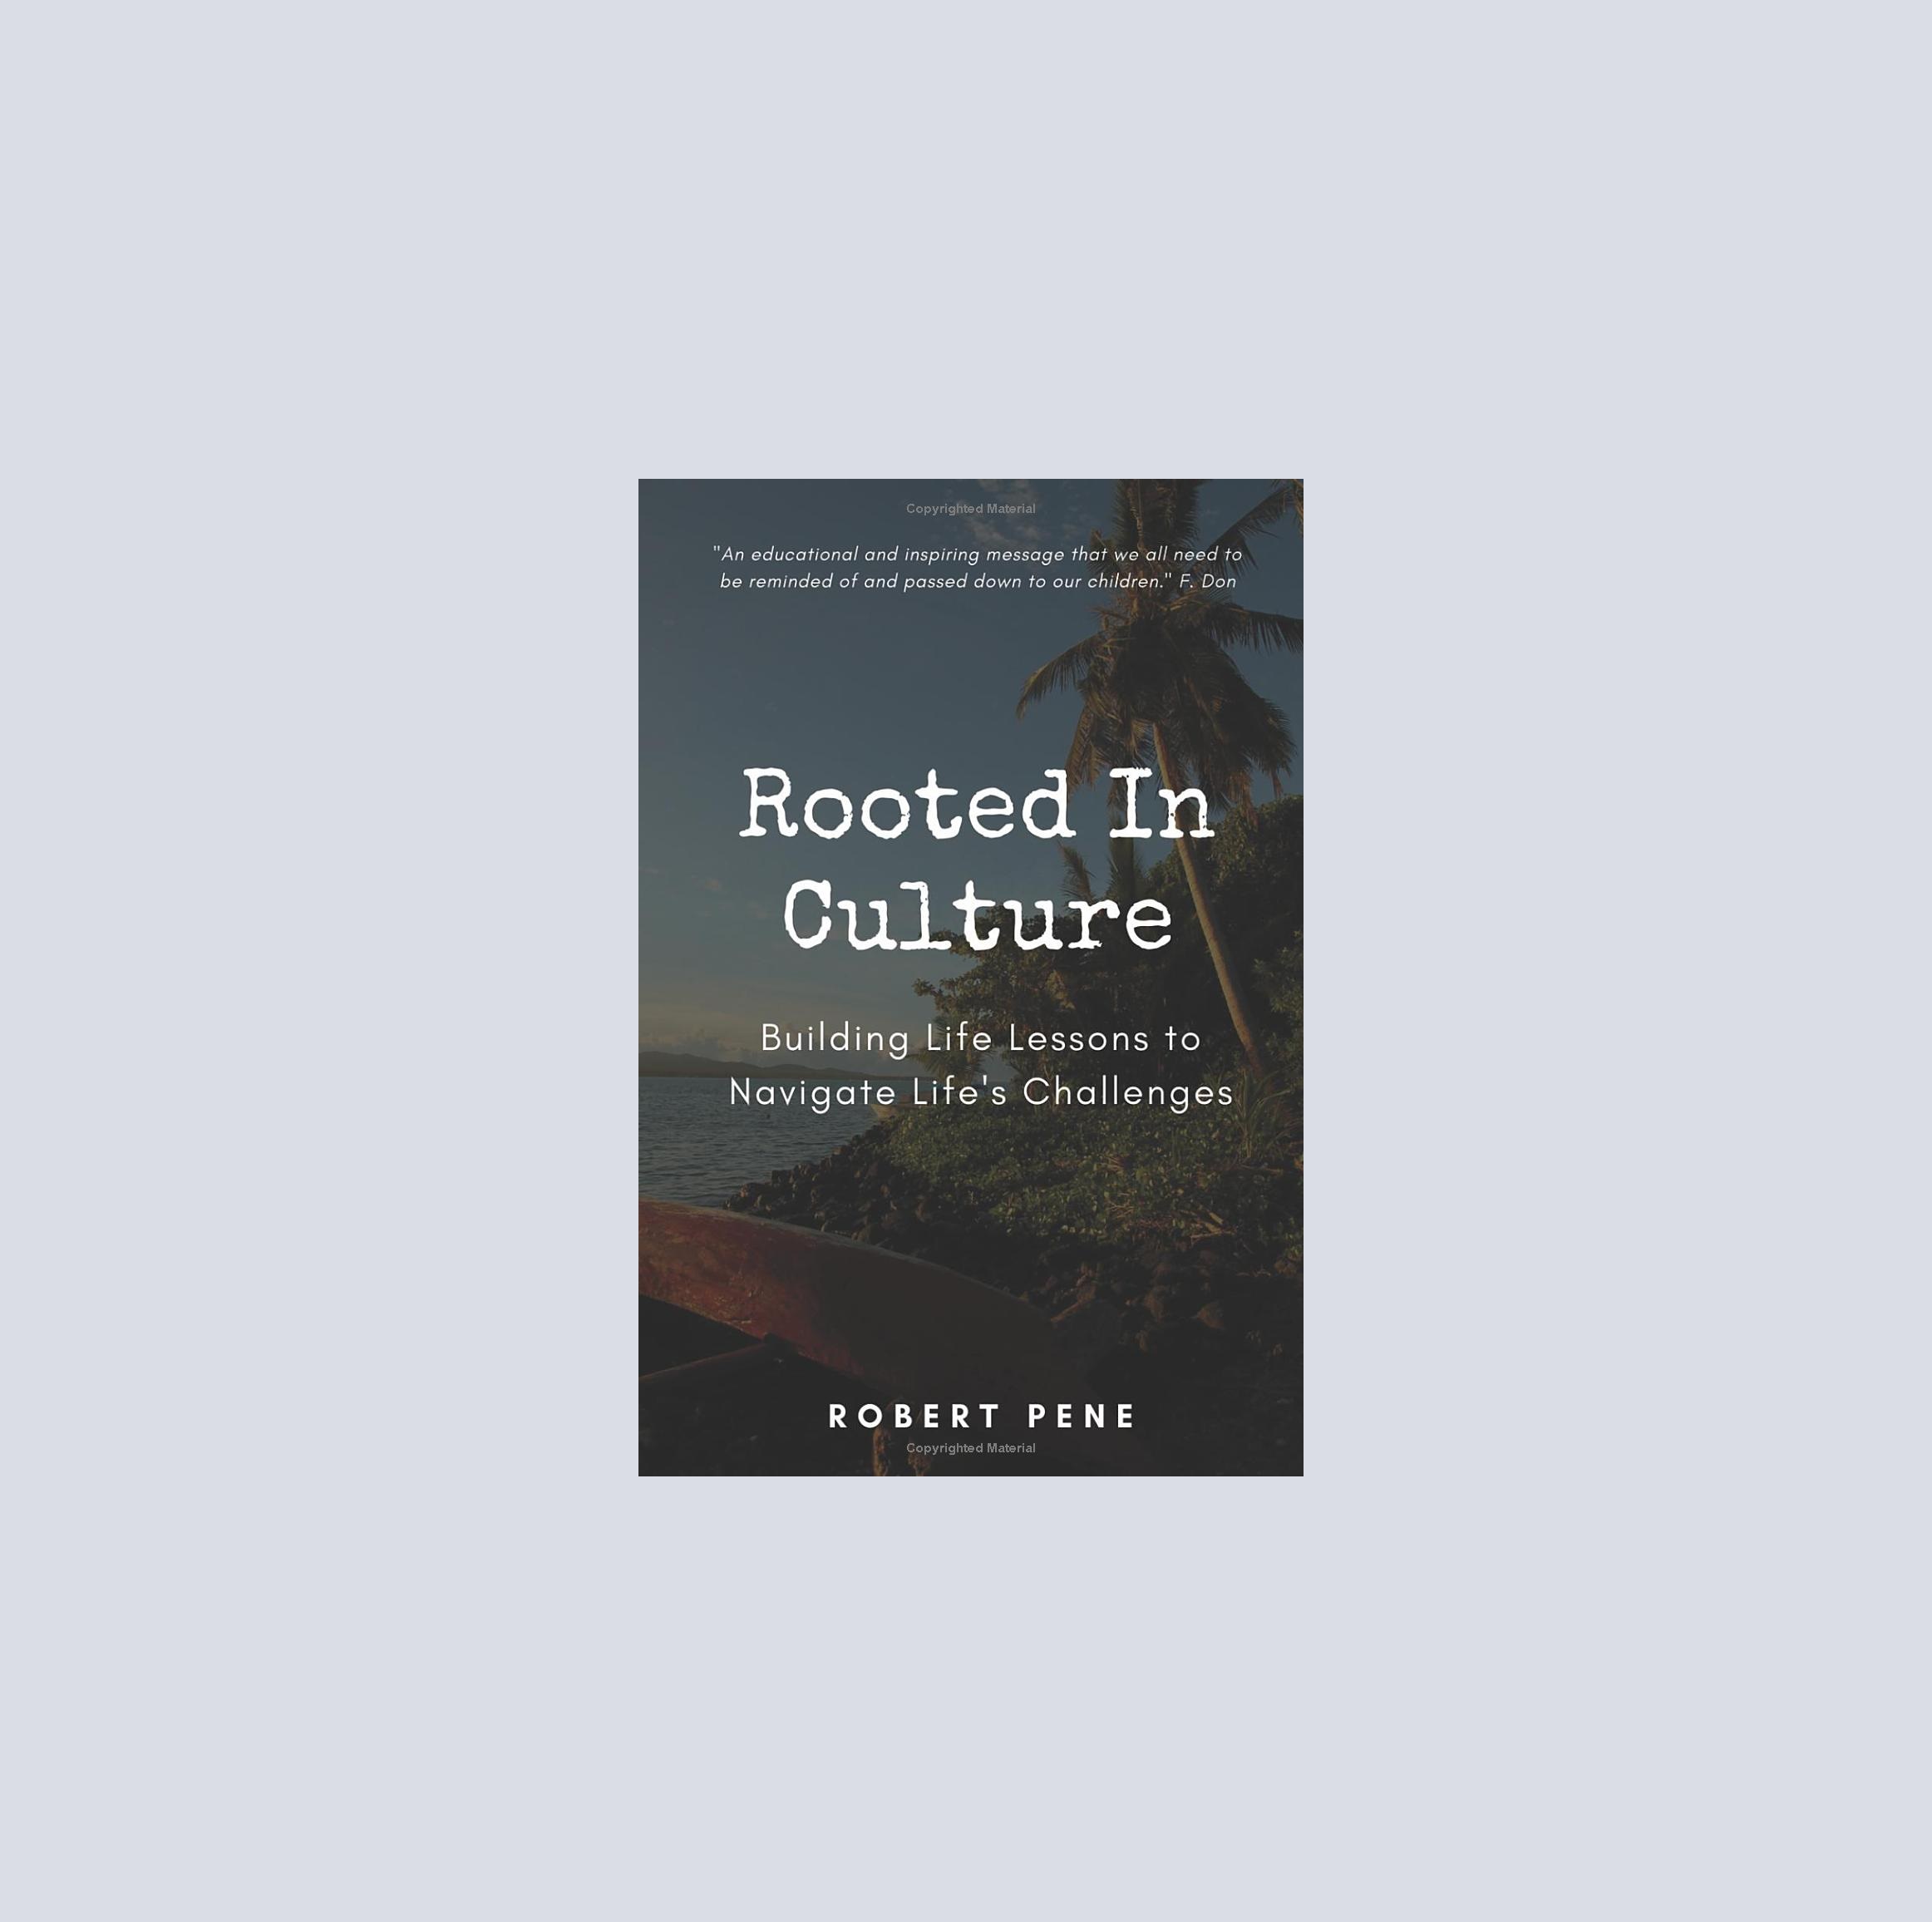 Rob Pene Reveals The Secret To A Thriving Life In His New Book 'Rooted In Culture'